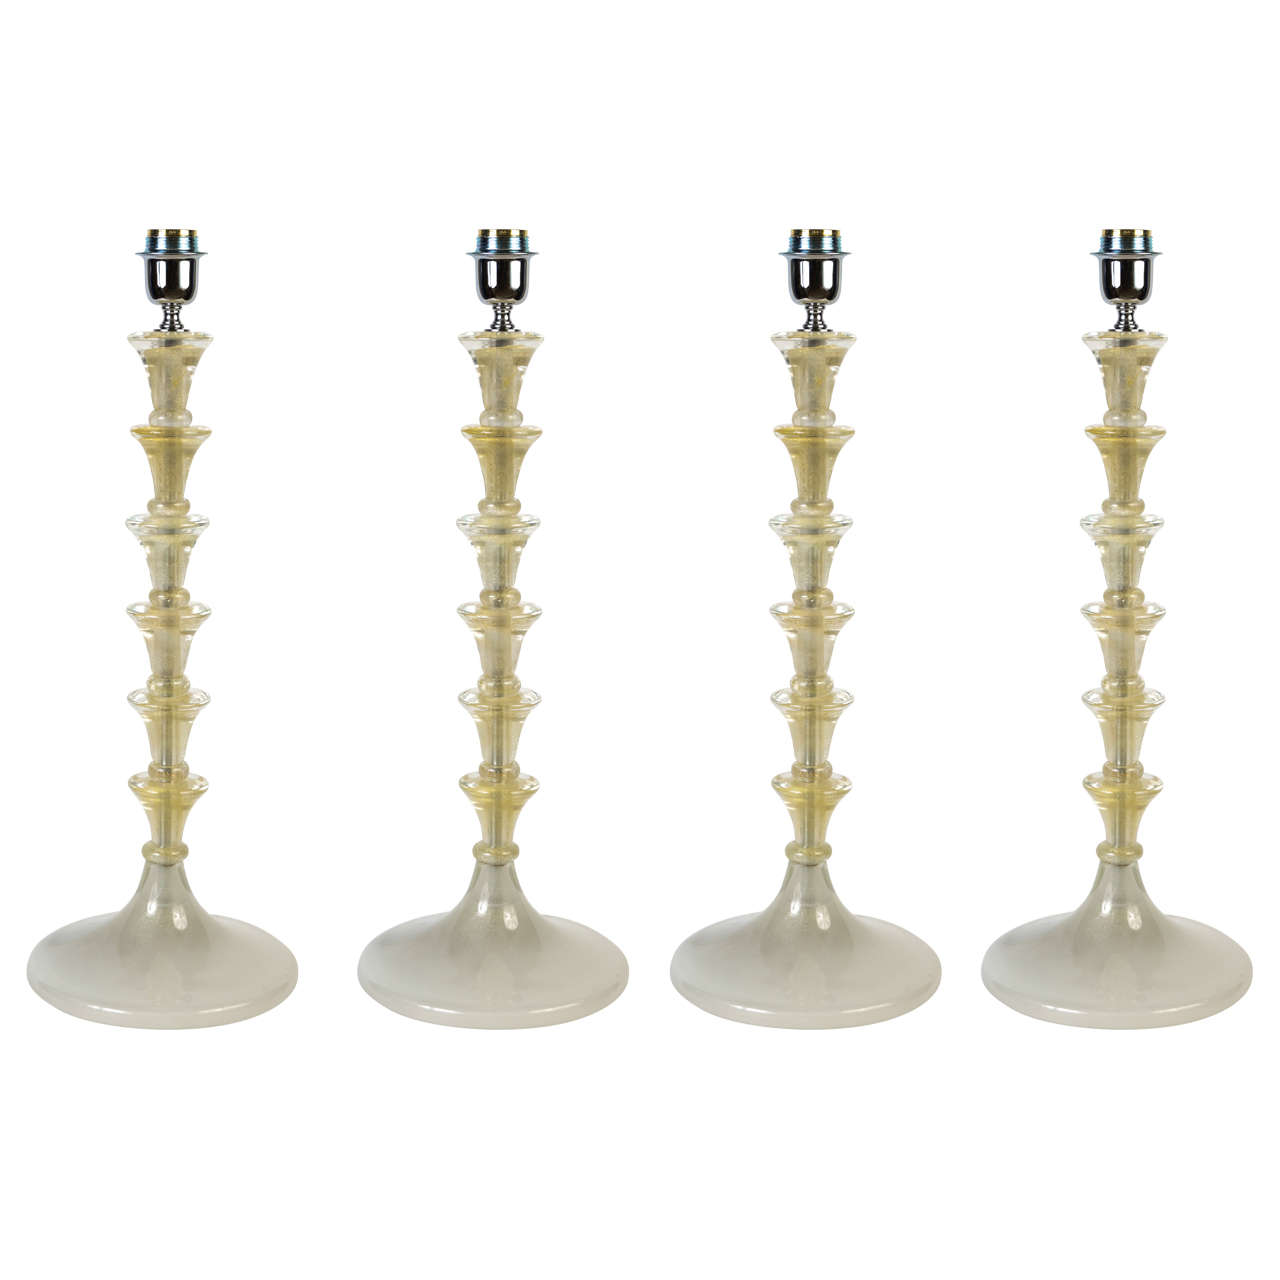 Set of Four Table Lamps in Murano Glass